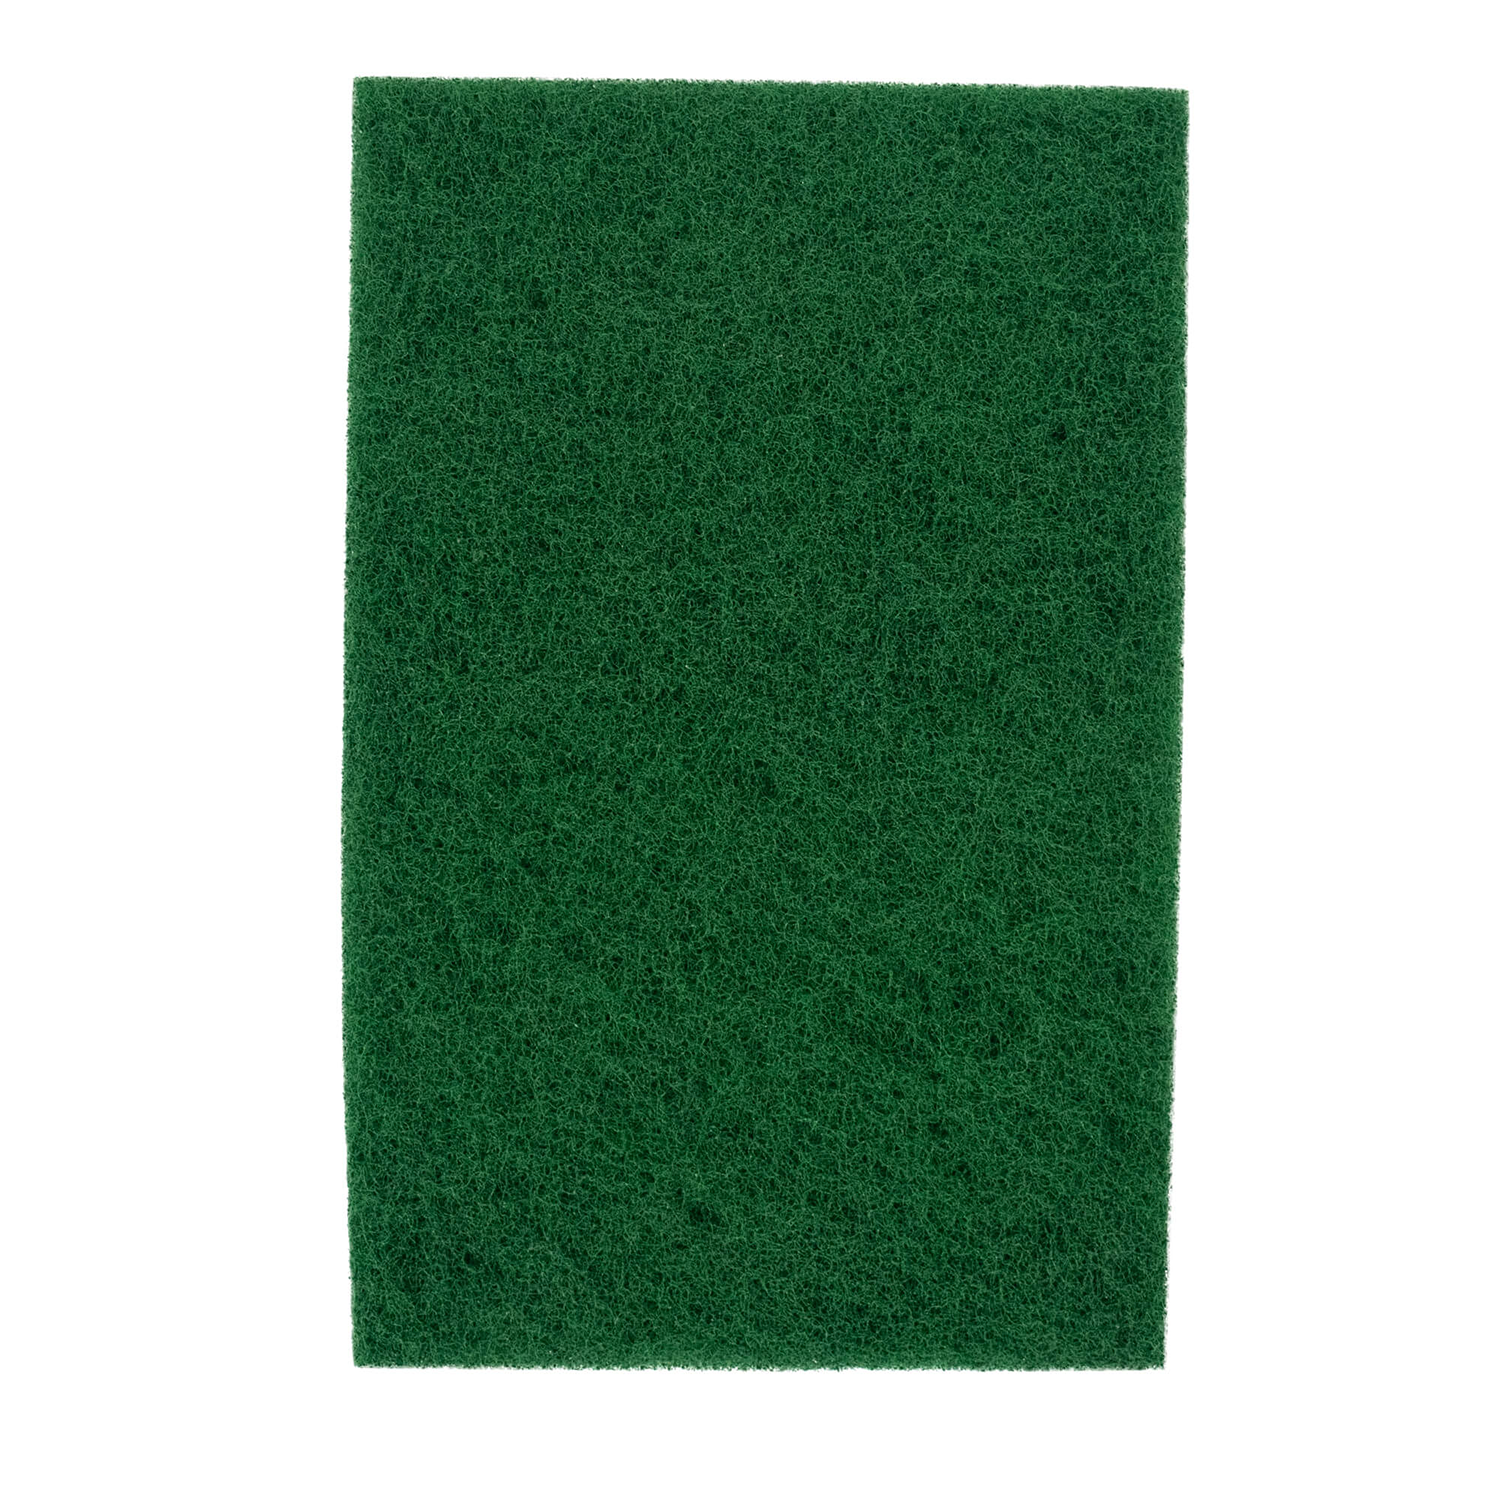 Economy Green Pads | 23 x 15cm | Pack of 10 (1)